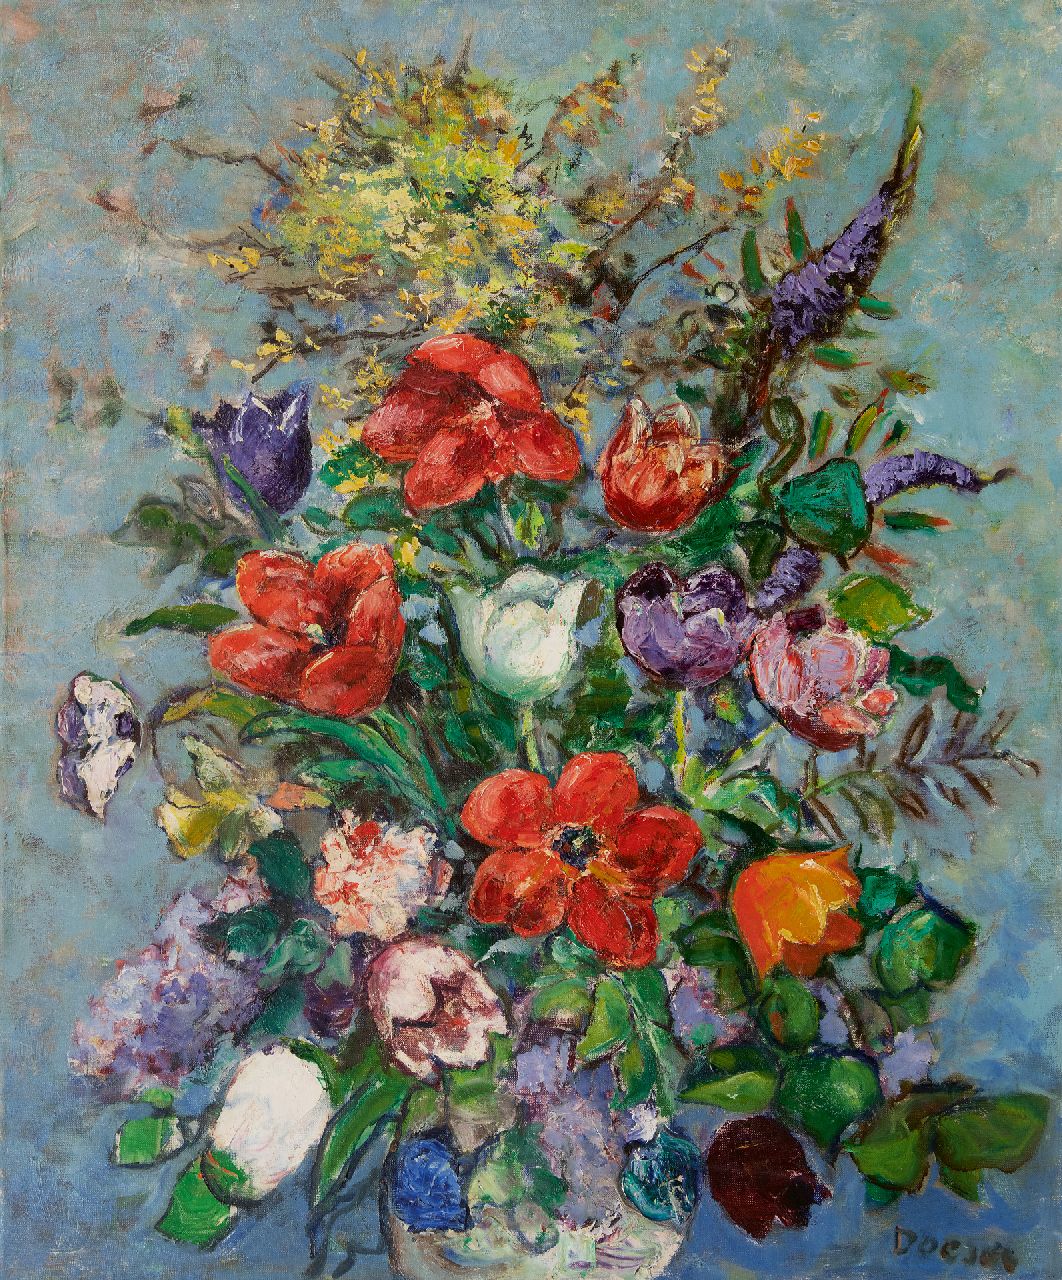 Doeser J.J.  | 'Jacobus' Johannes Doeser | Paintings offered for sale | Summer flowers, oil on canvas 94.8 x 78.0 cm, signed l.r.